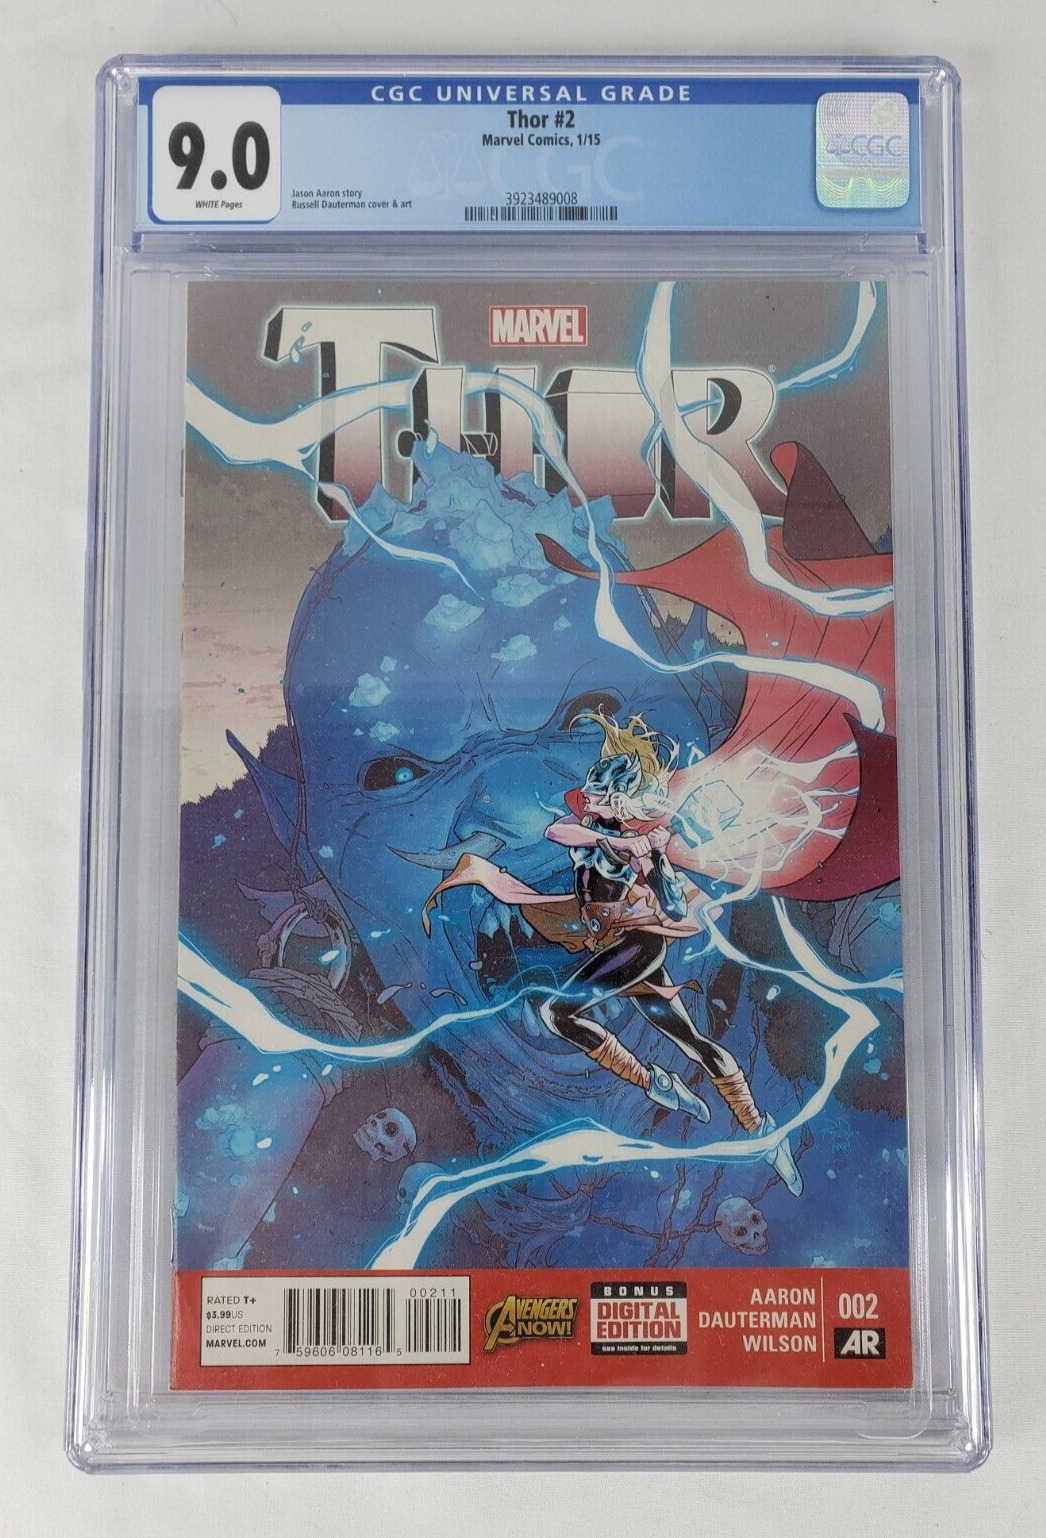 THOR #2 CGC 9.0 GRADED 2015 MARVEL 1ST FULL APPEARANCE OF JAN FOSTER AS THOR